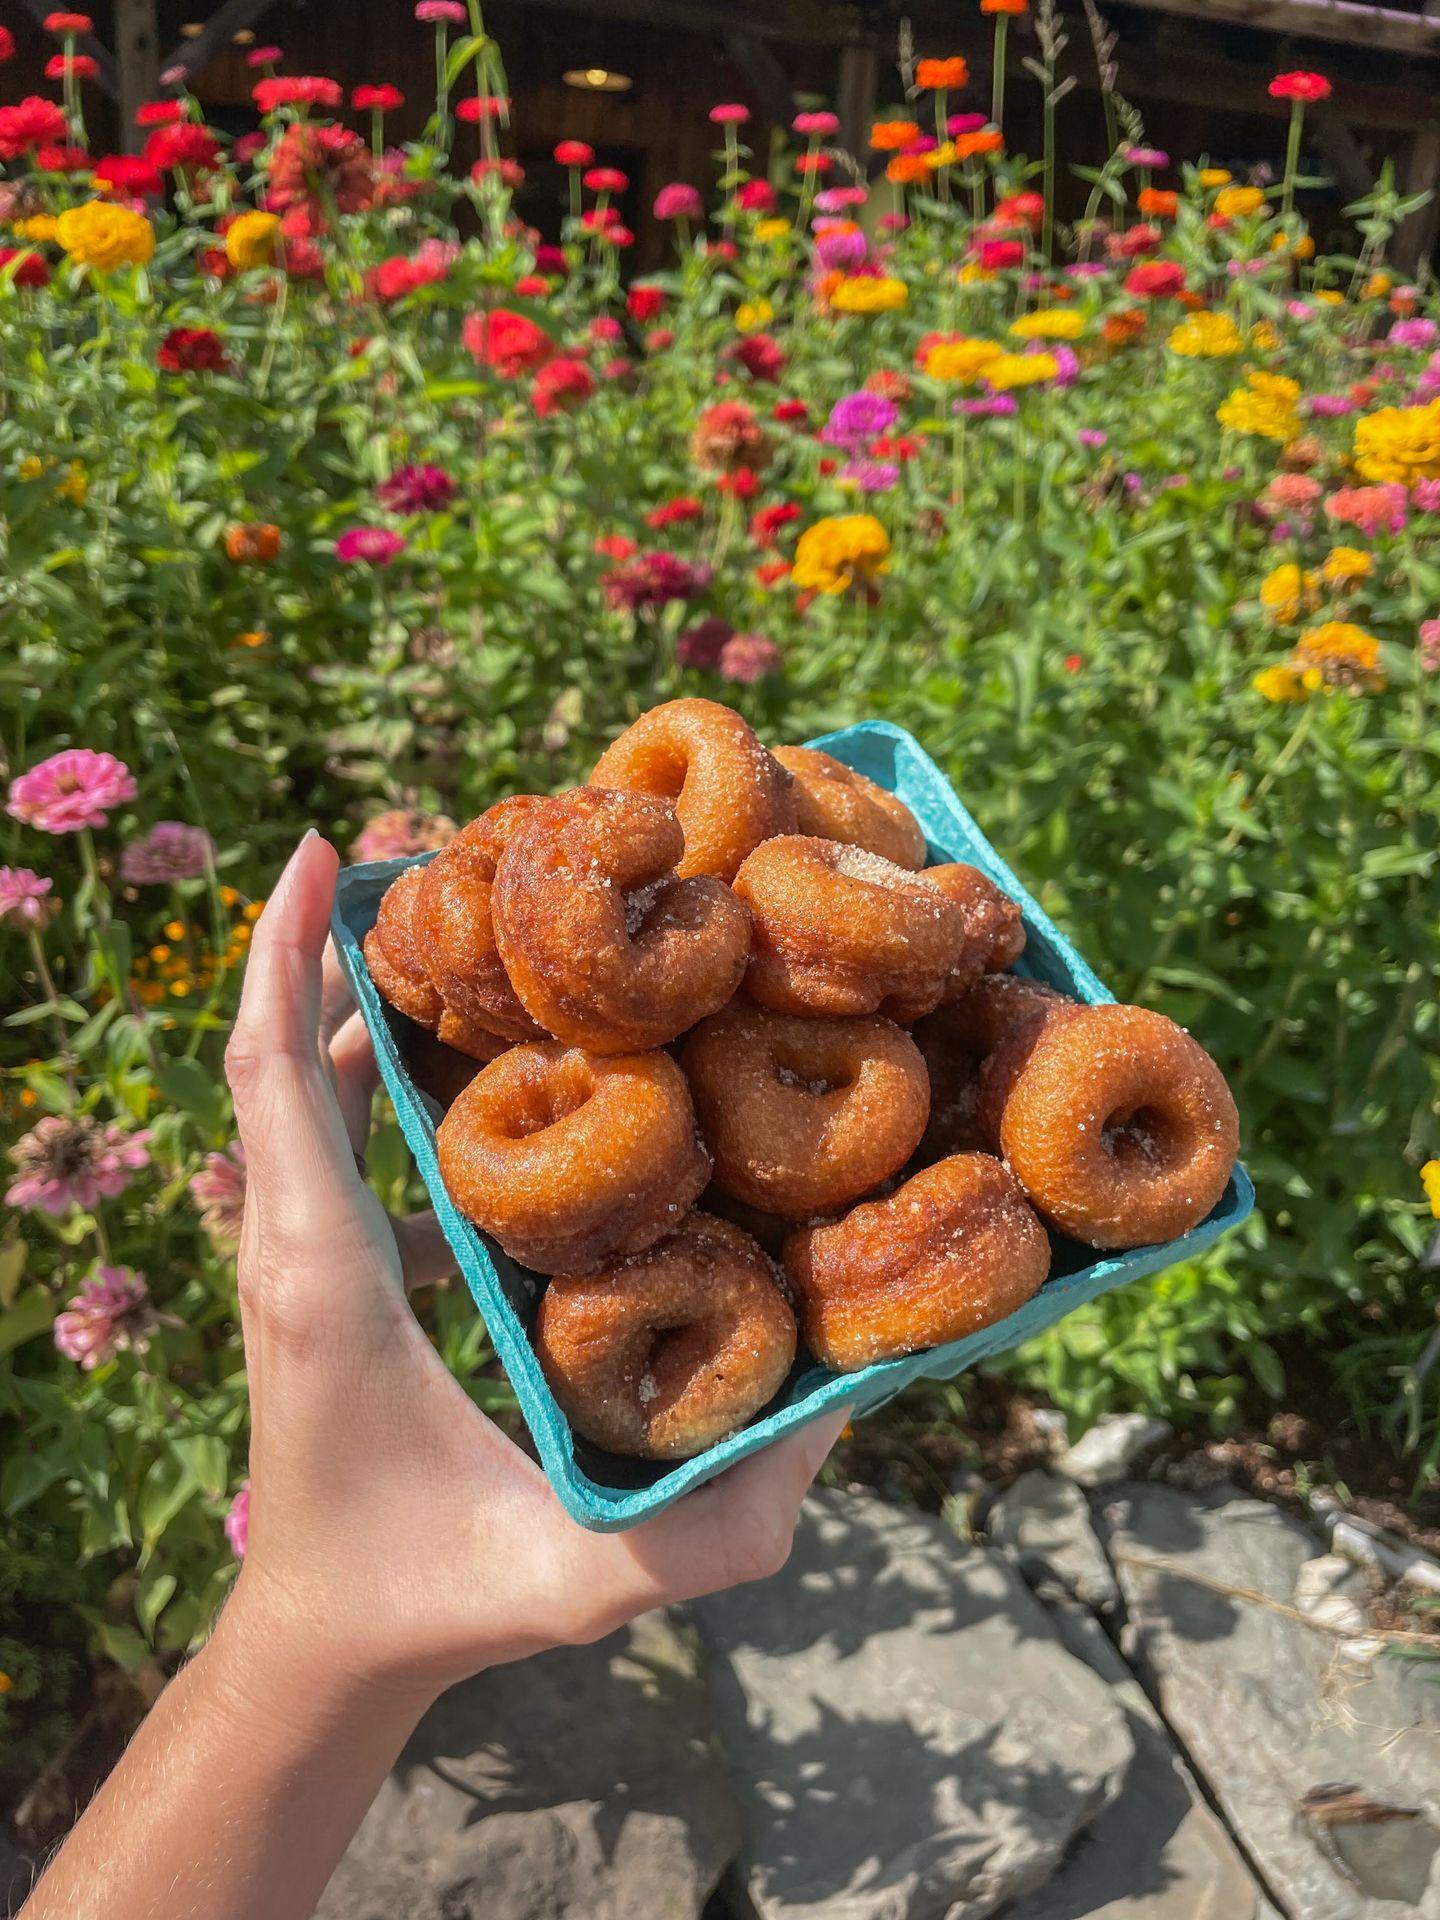 A container of small apple cider donuts from Indian Creek Farm